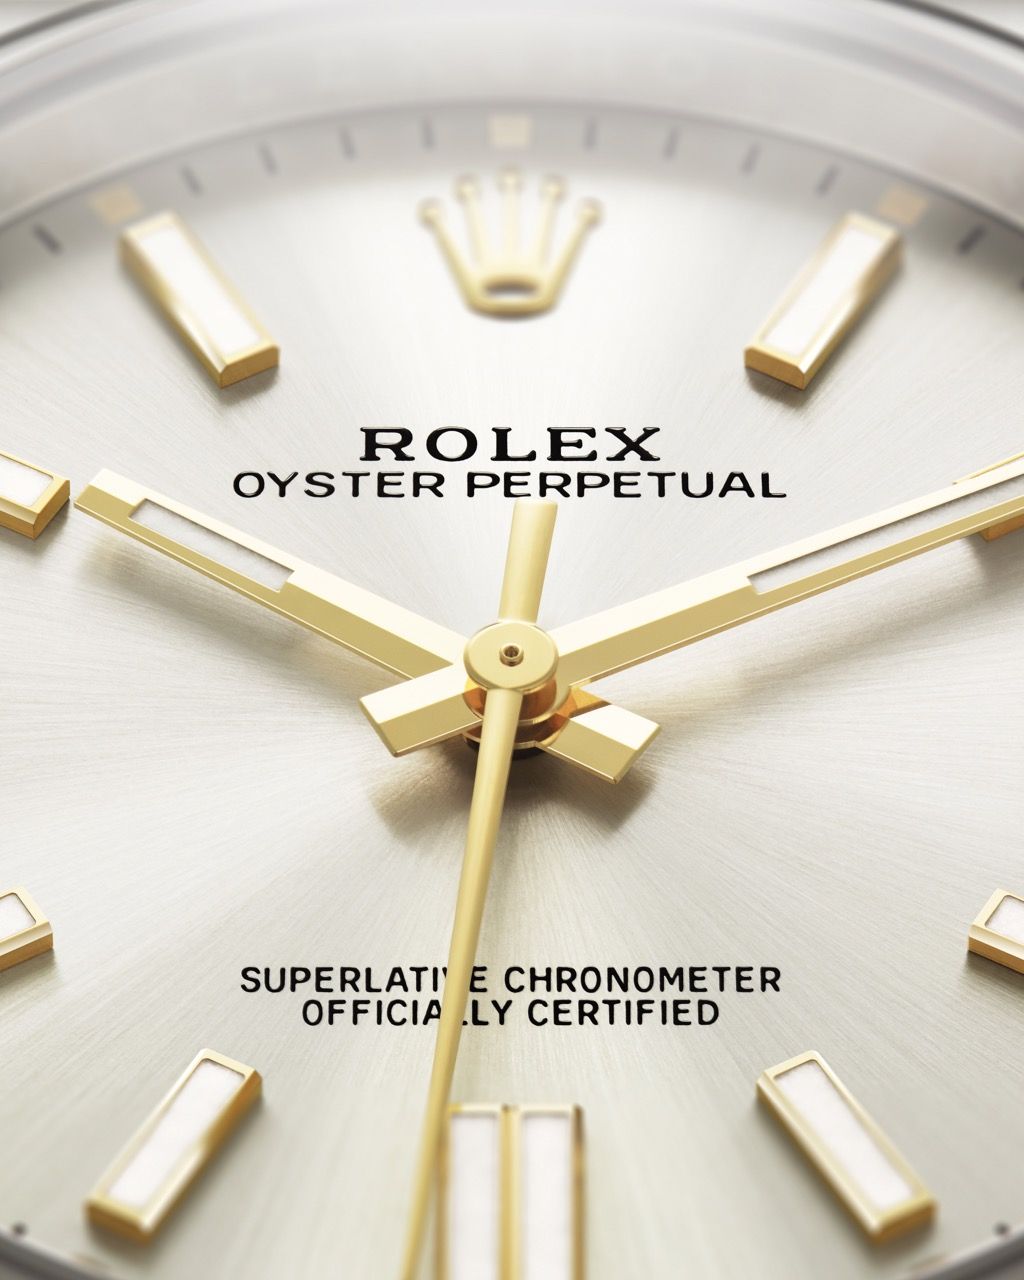 Each Rolex watch is distinguished by superlative performance © Rolex, Thomas Hensinger